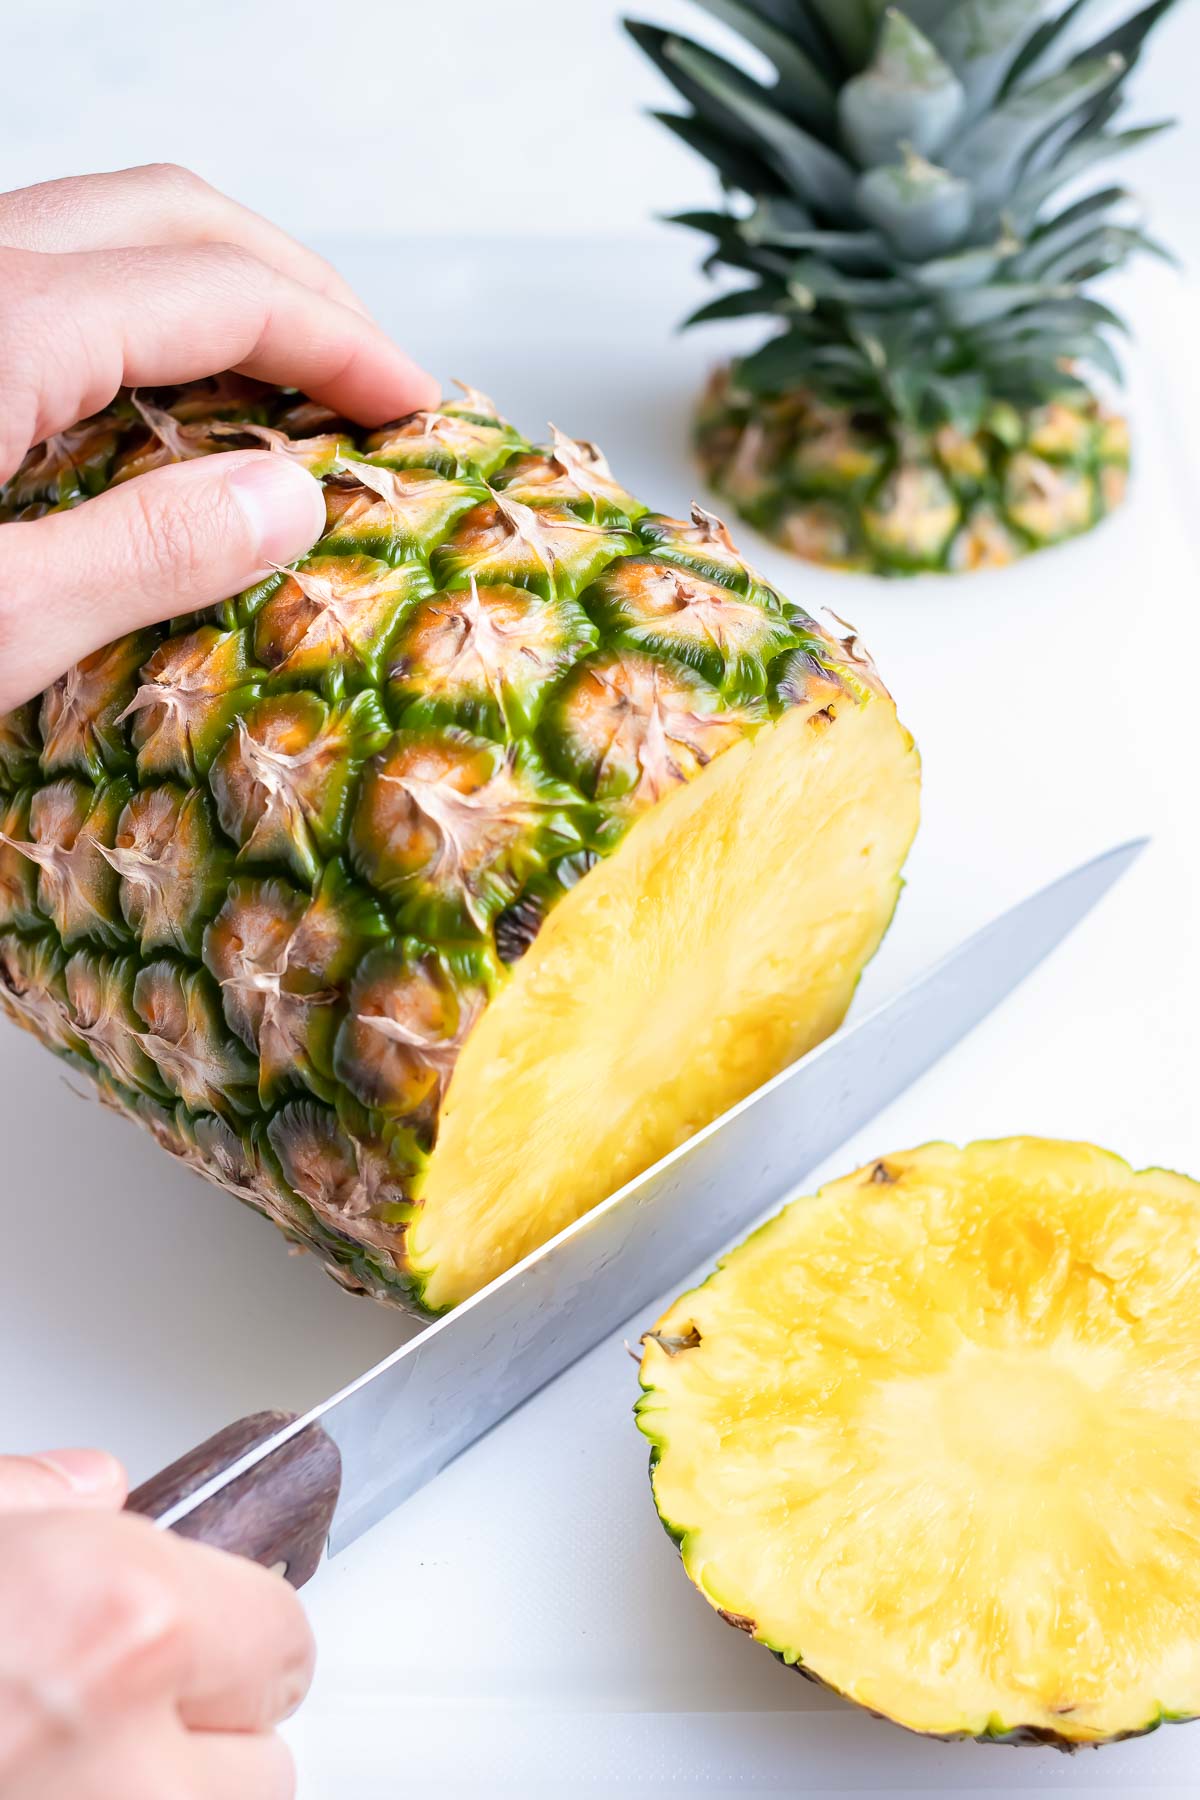 How to Cut Pineapple (The Easy Way!) - Evolving Table